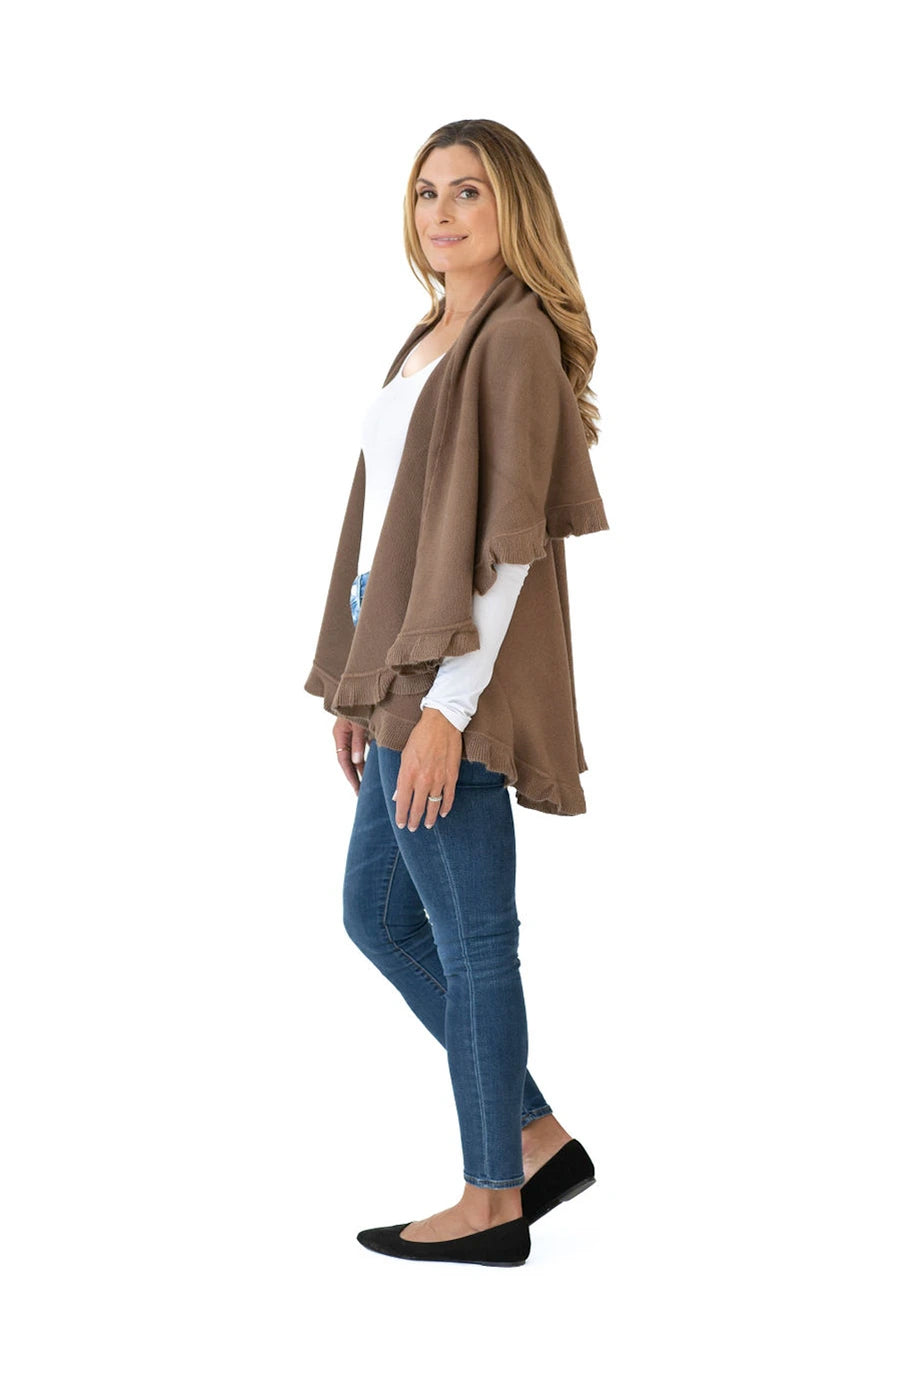 Shawl Sweater Vest in Taupe with Ruffle Trim-Customer Favorite Shawls For Over 10 Years